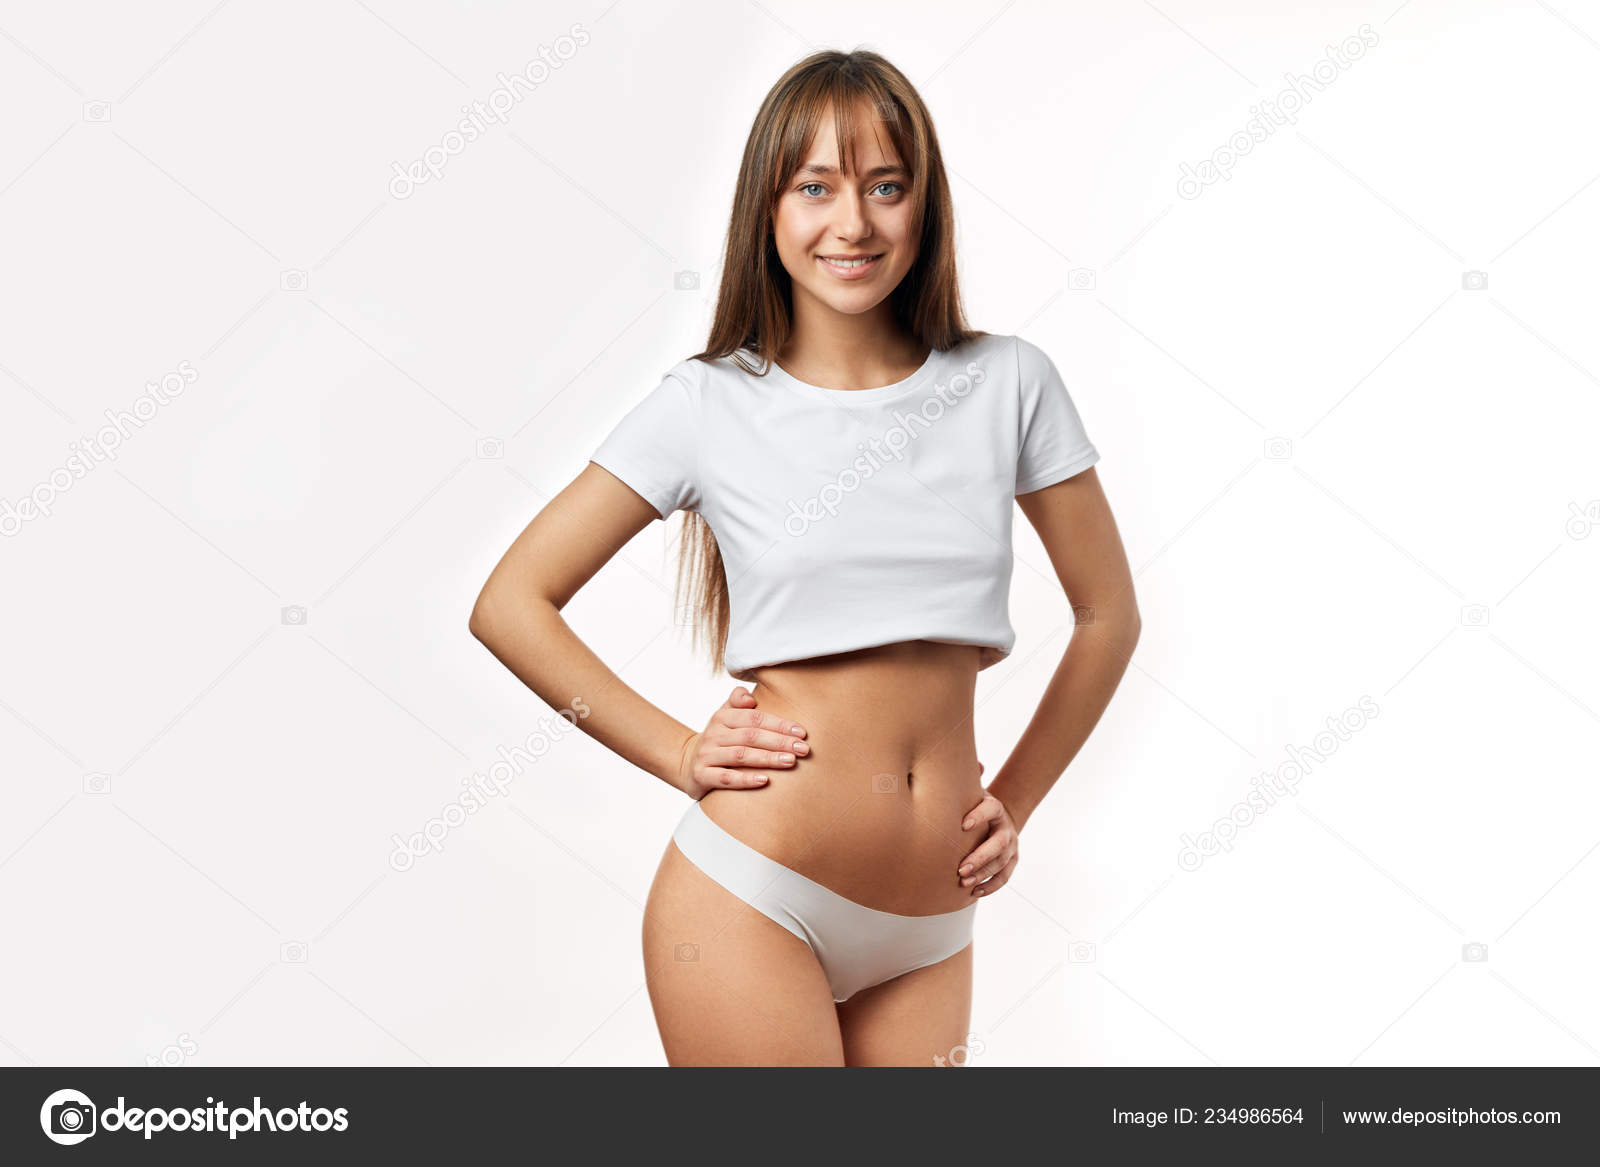 Attractive young woman in white underwear posing against white